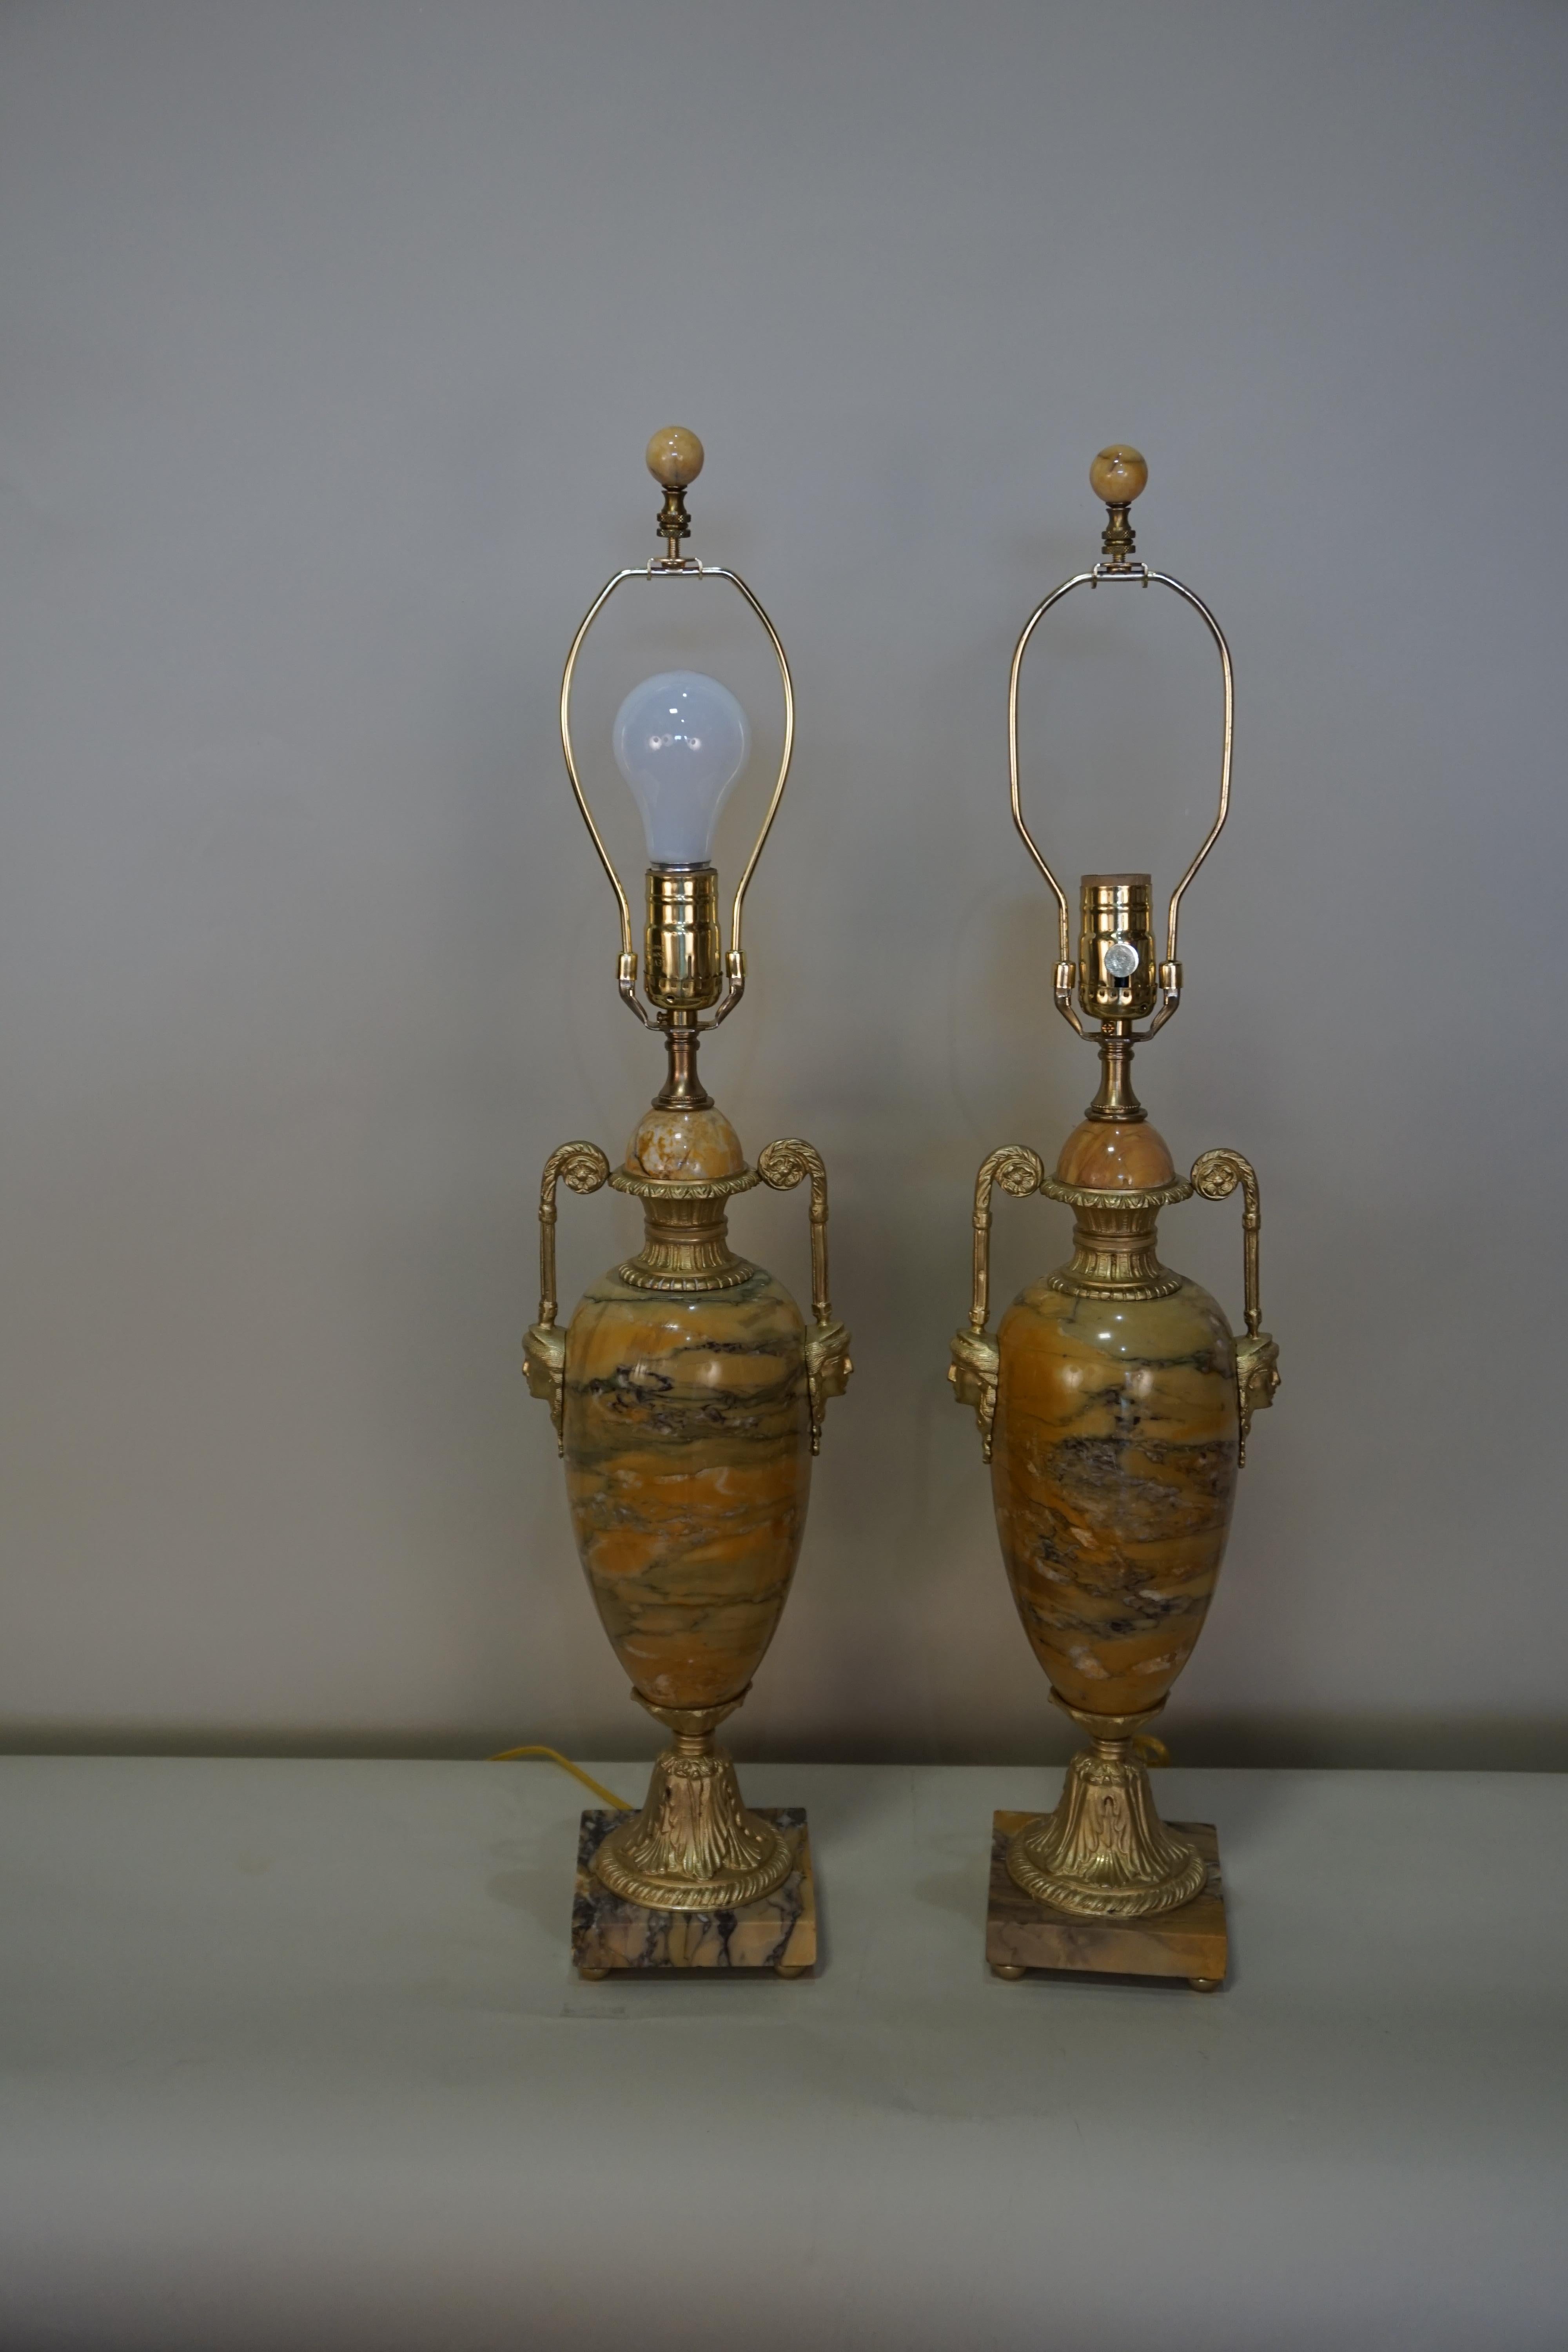 Pair of Empire style electrified marble and bronze table lamps.
Fitted with box pleat silk lampshades.